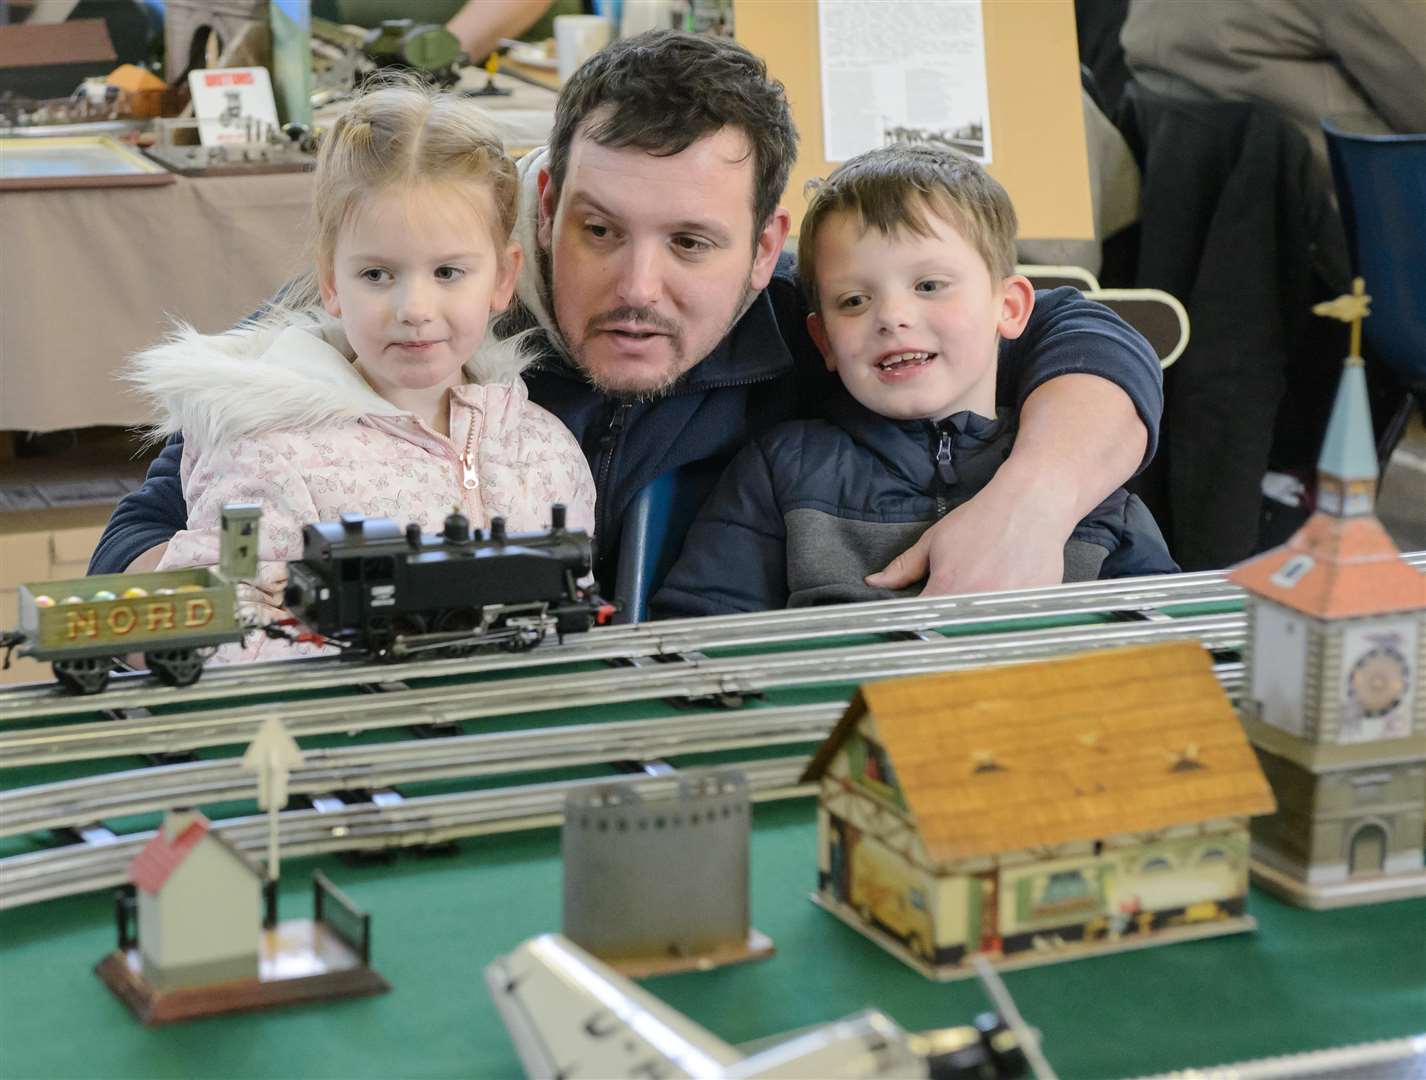 There are rare model trains, cars and an Airfix D-Day exhibition plus an interactive Thomas and Friends track at the visitor centre